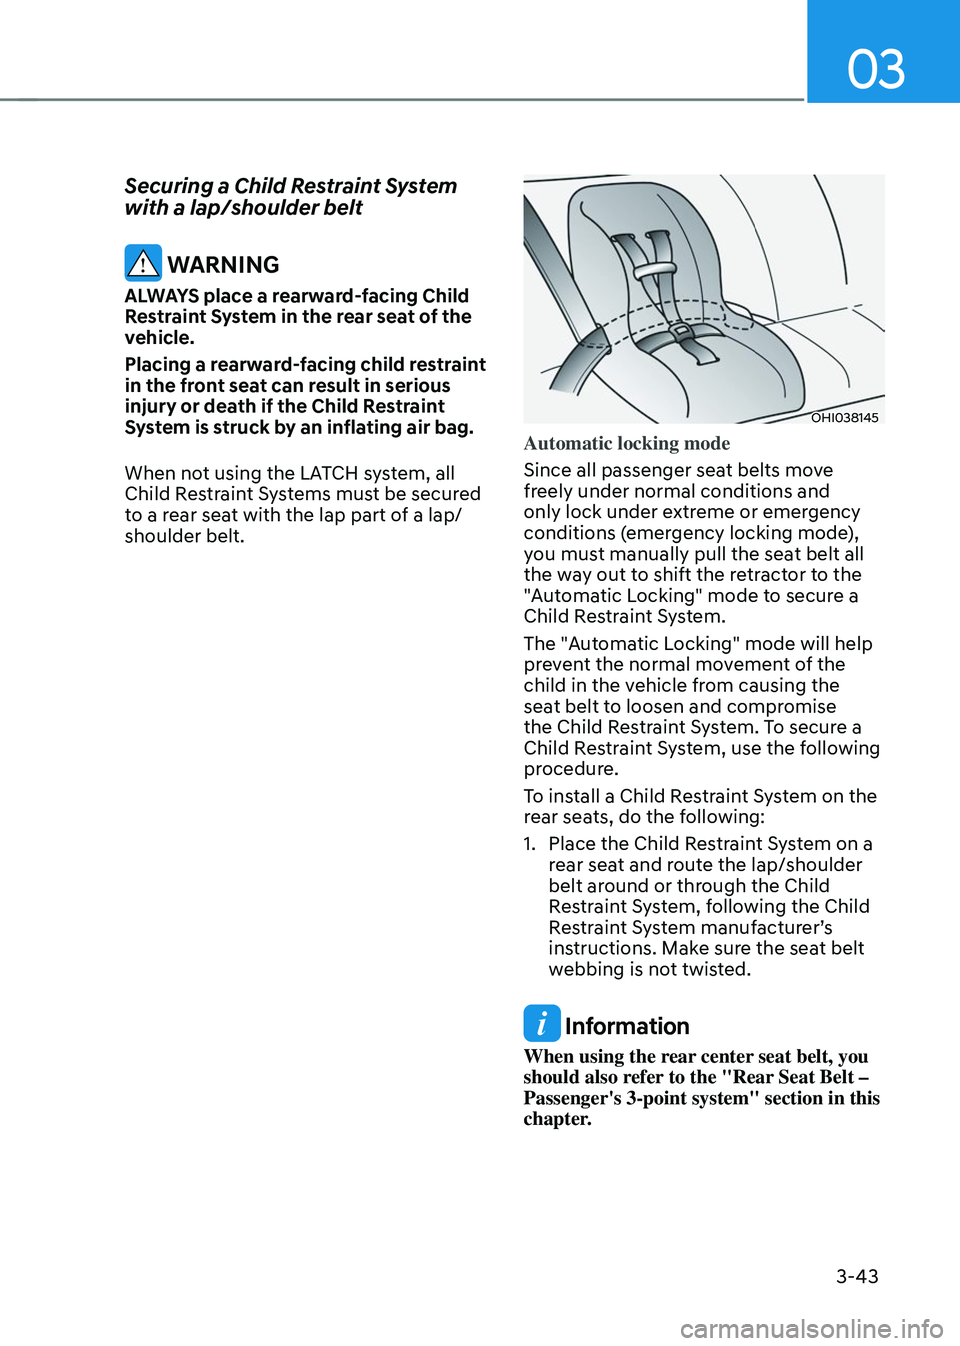 HYUNDAI TUCSON 2023  Owners Manual 03
3-43
Securing a Child Restraint System 
with a lap/shoulder belt
 WARNING
ALWAYS place a rearward-facing Child 
Restraint System in the rear seat of the 
vehicle.
Placing a rearward-facing child re